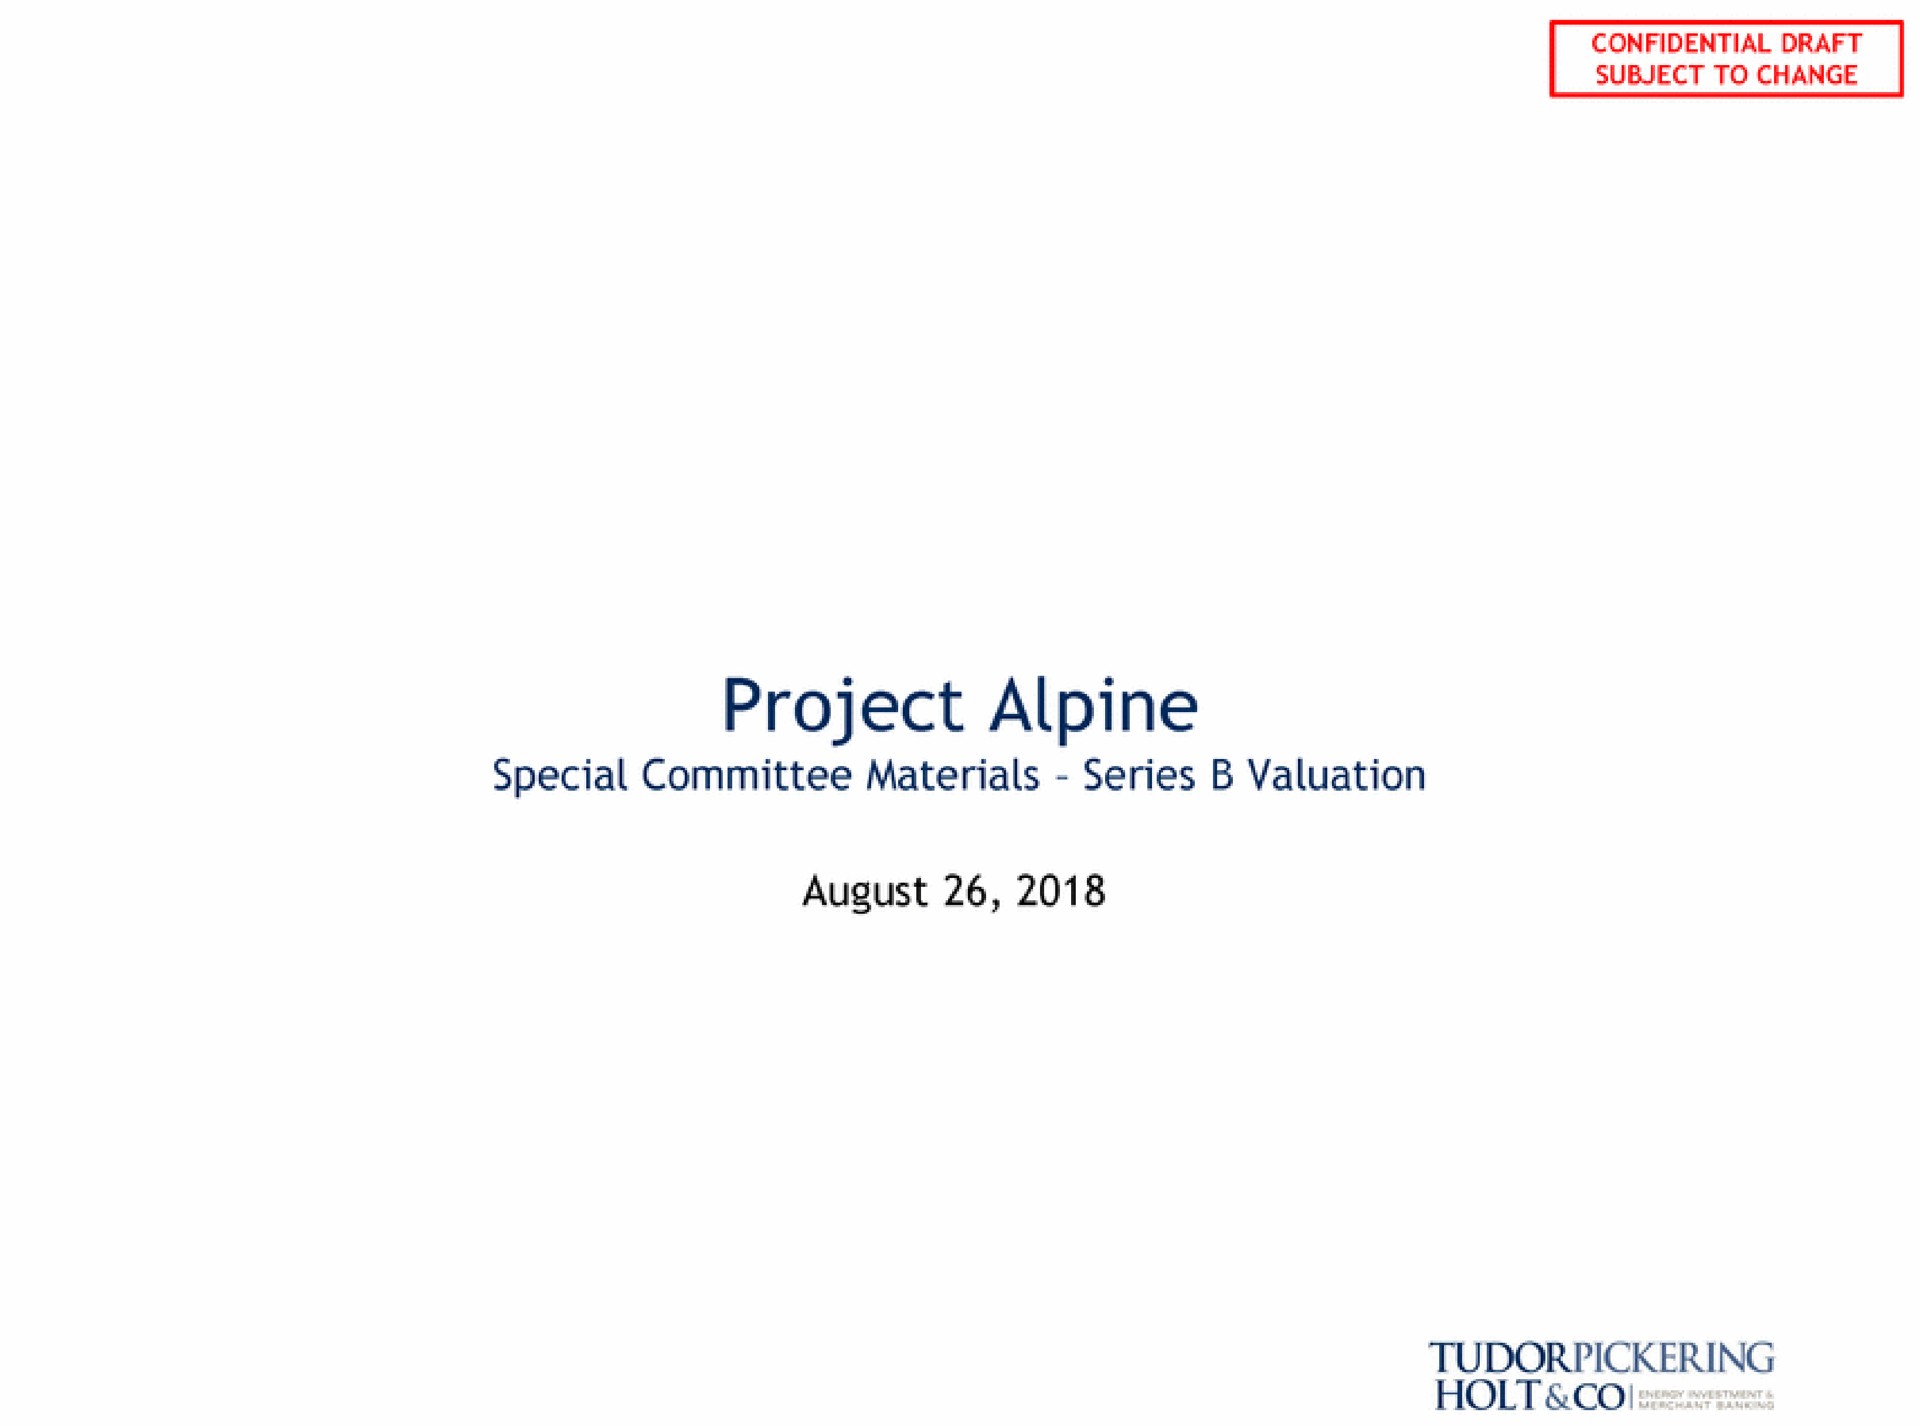 project alpine special committee materials series valuation august holt coo | Tudor, Pickering, Holt & Co